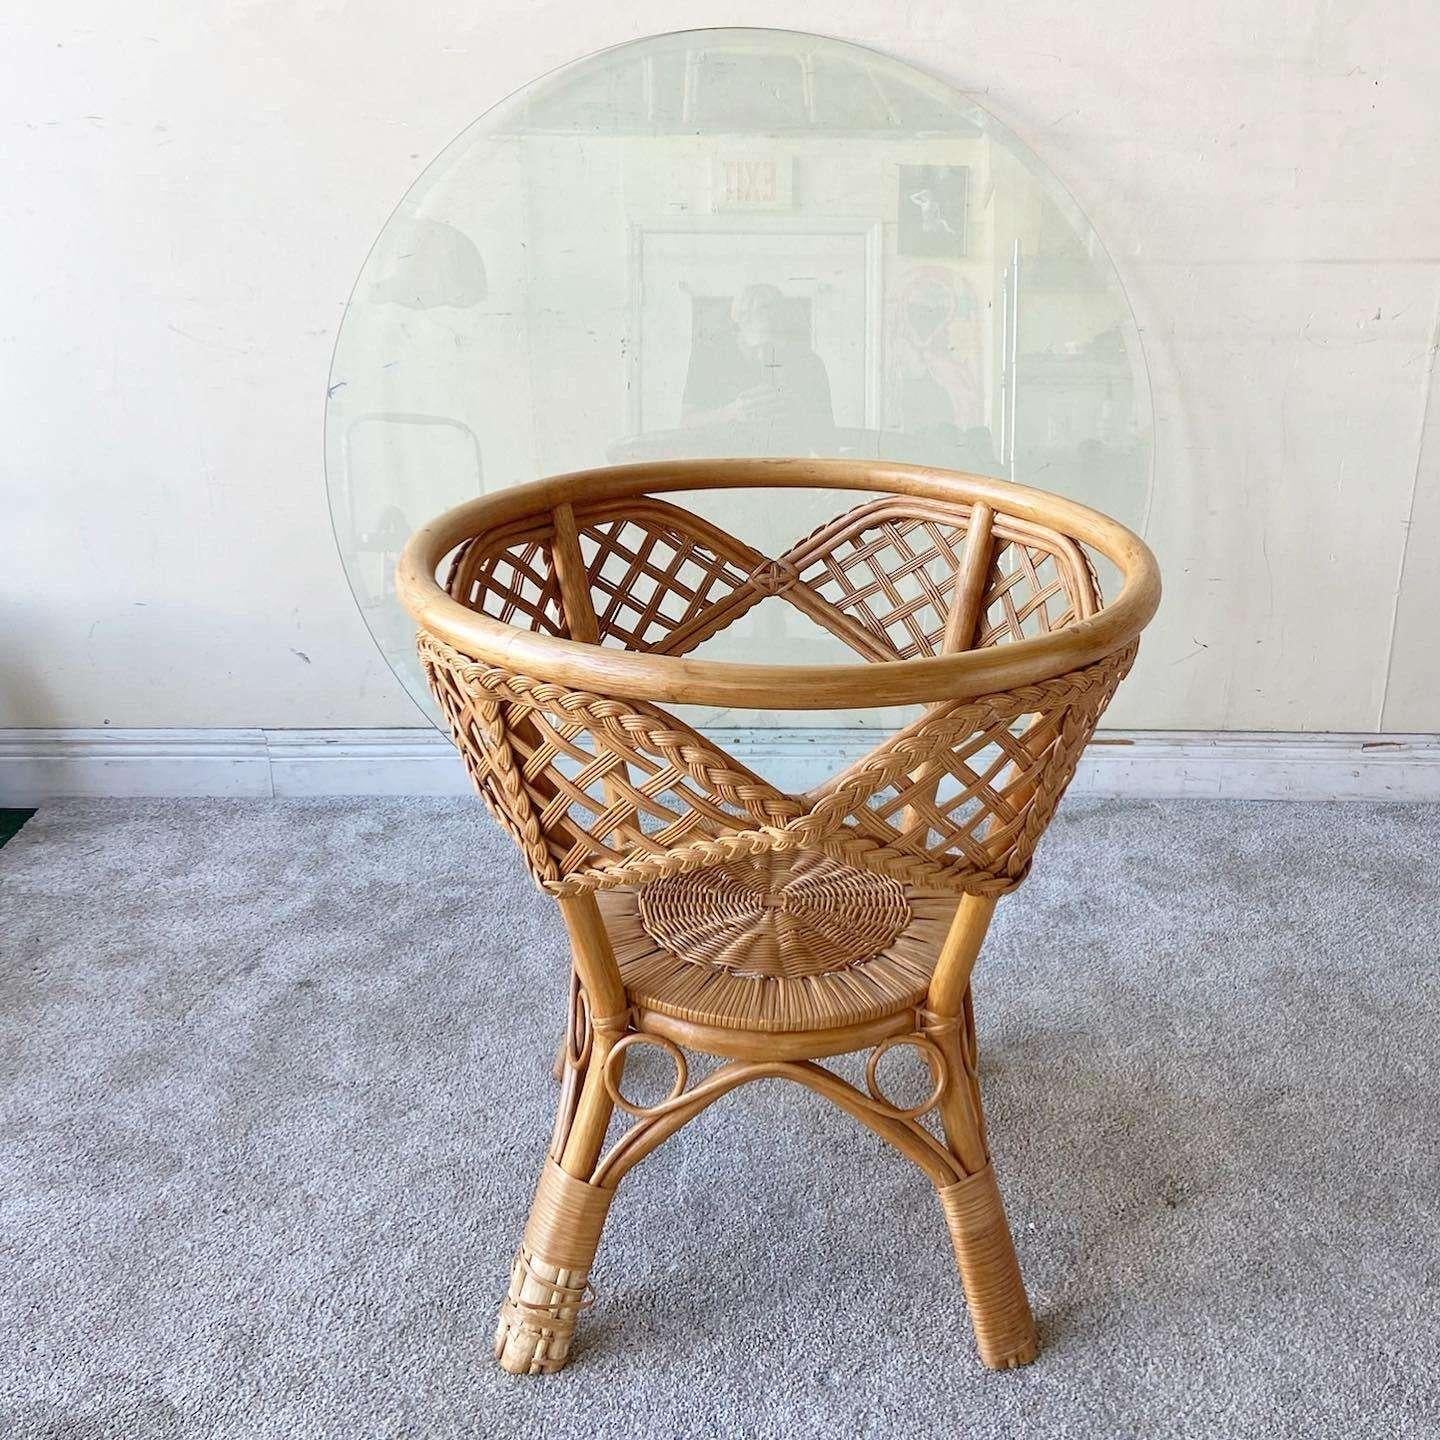 Late 20th Century 1980s Boho Chic Rattan and Woven Wicker Circular Glass Top Dining Table For Sale